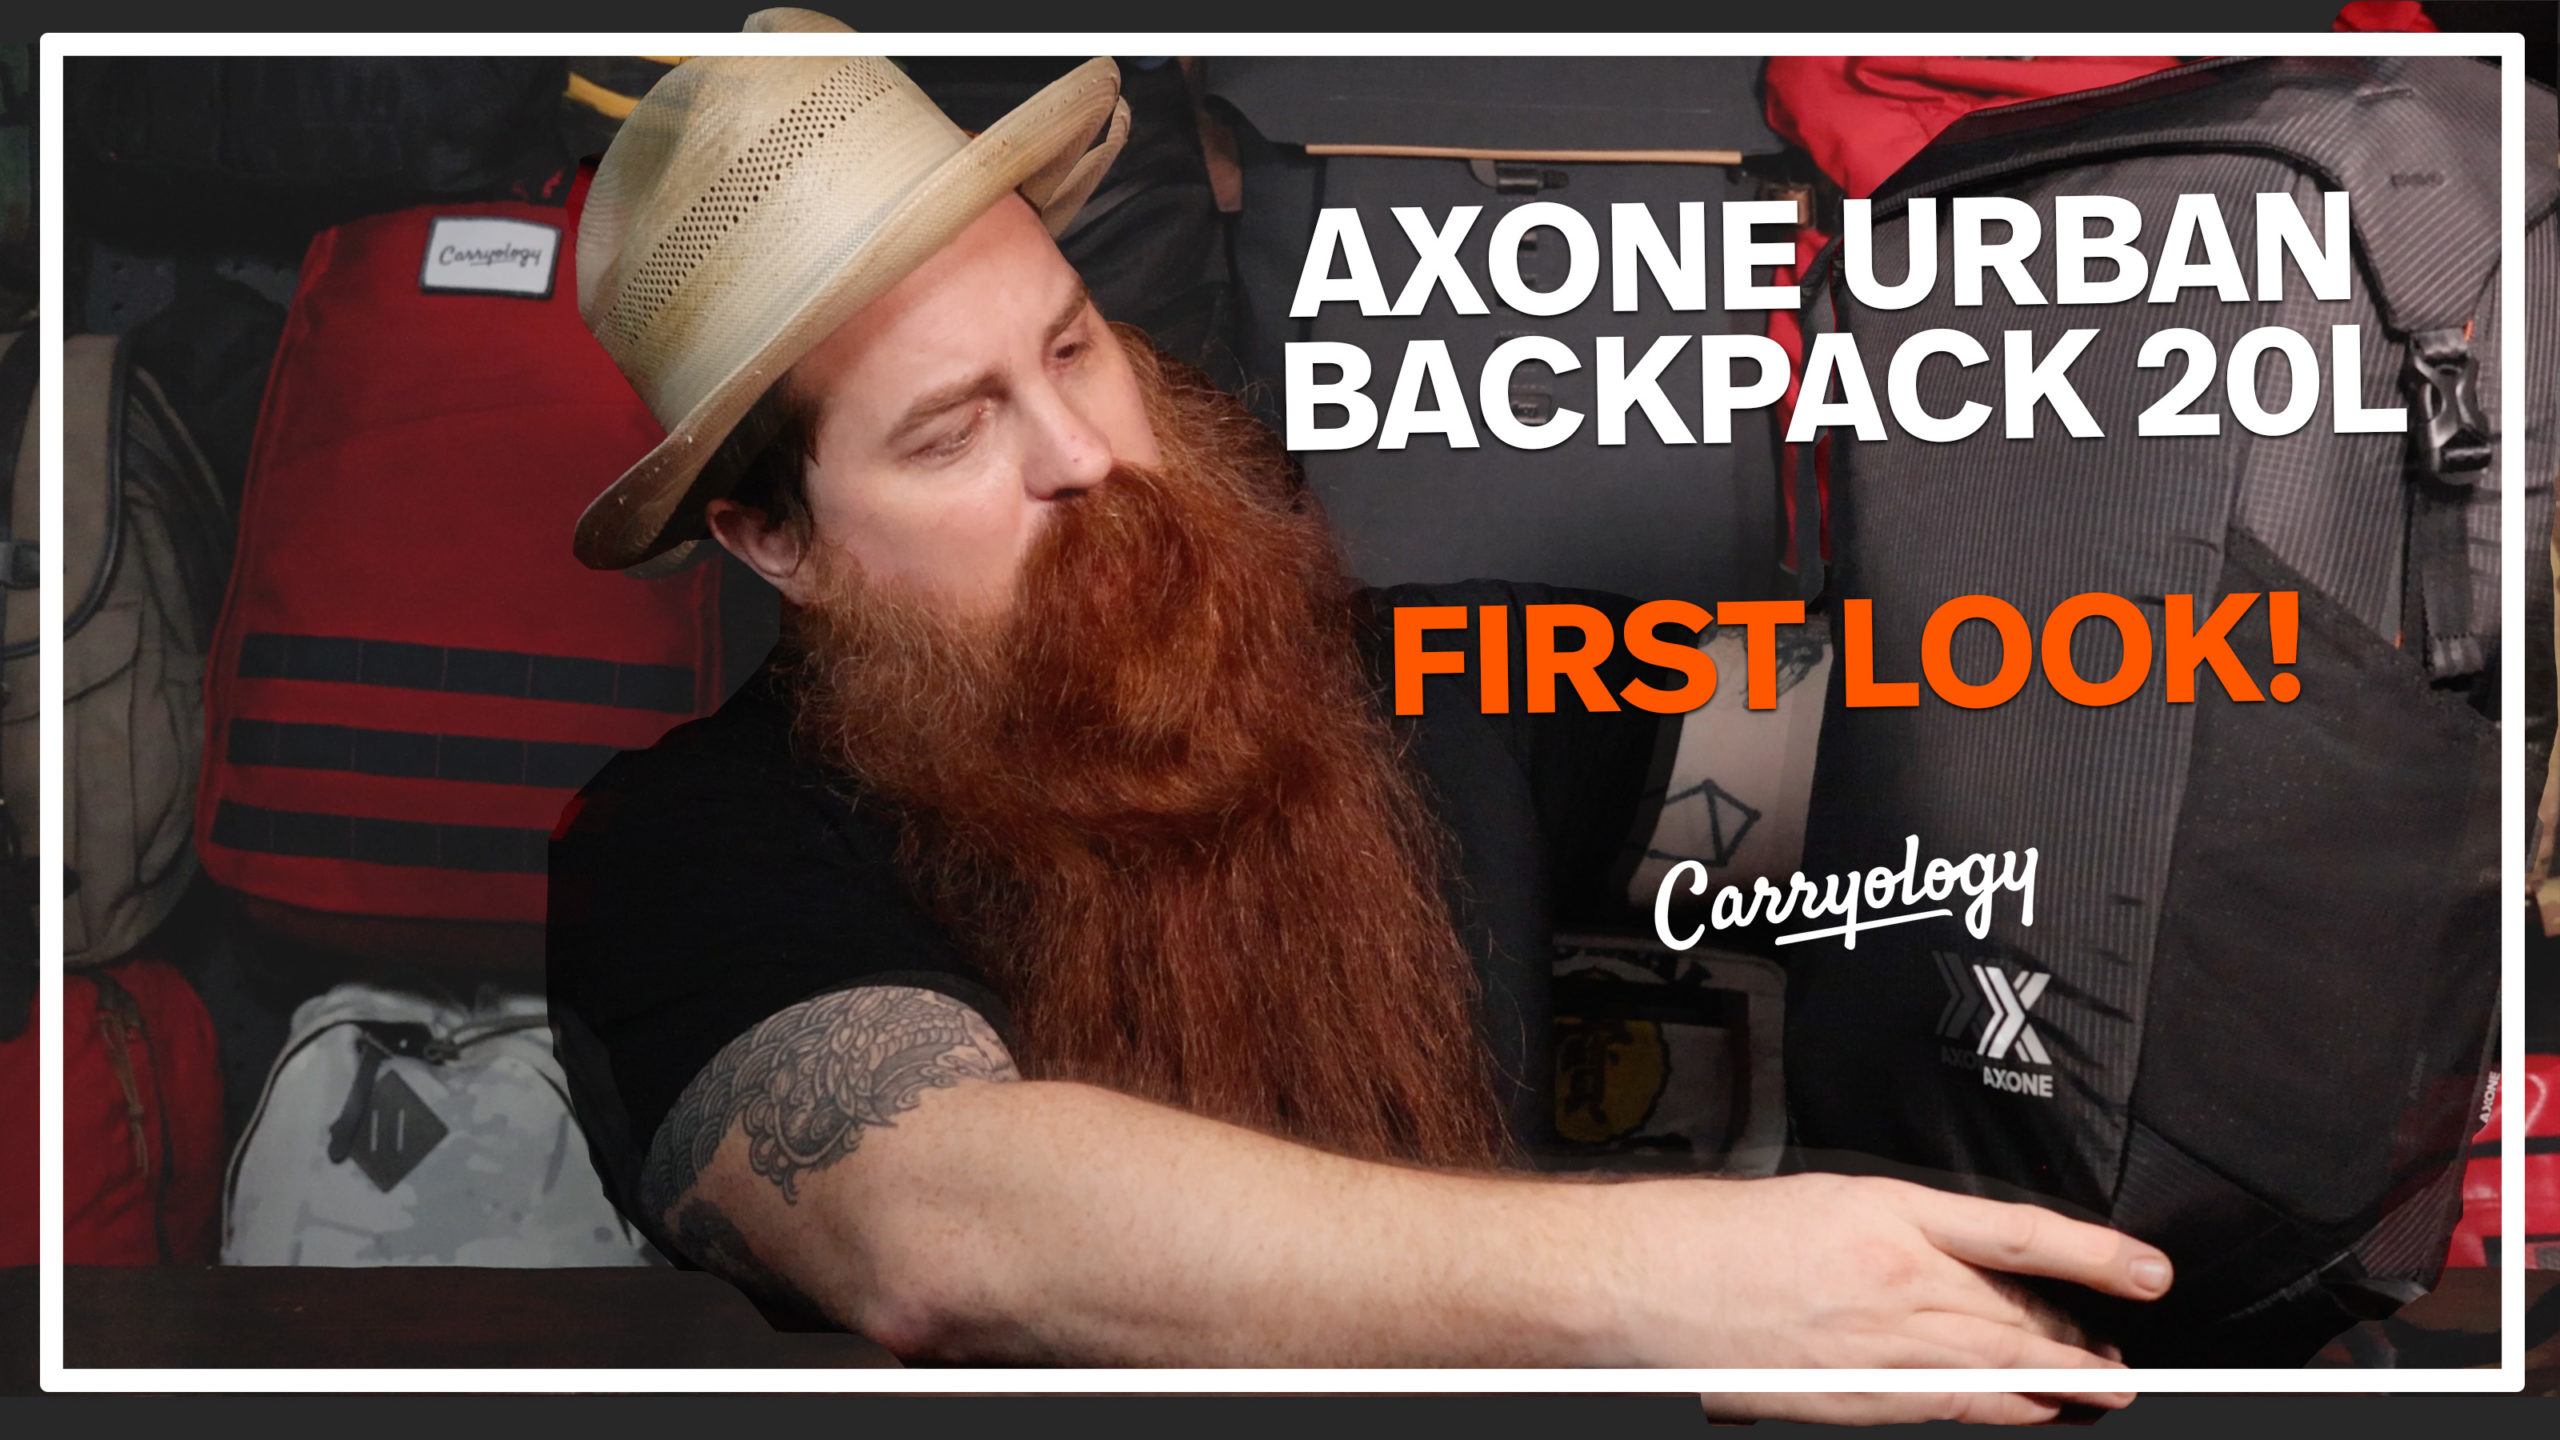 AXONE Urban Backpack 20L &#8211; First Look Video!